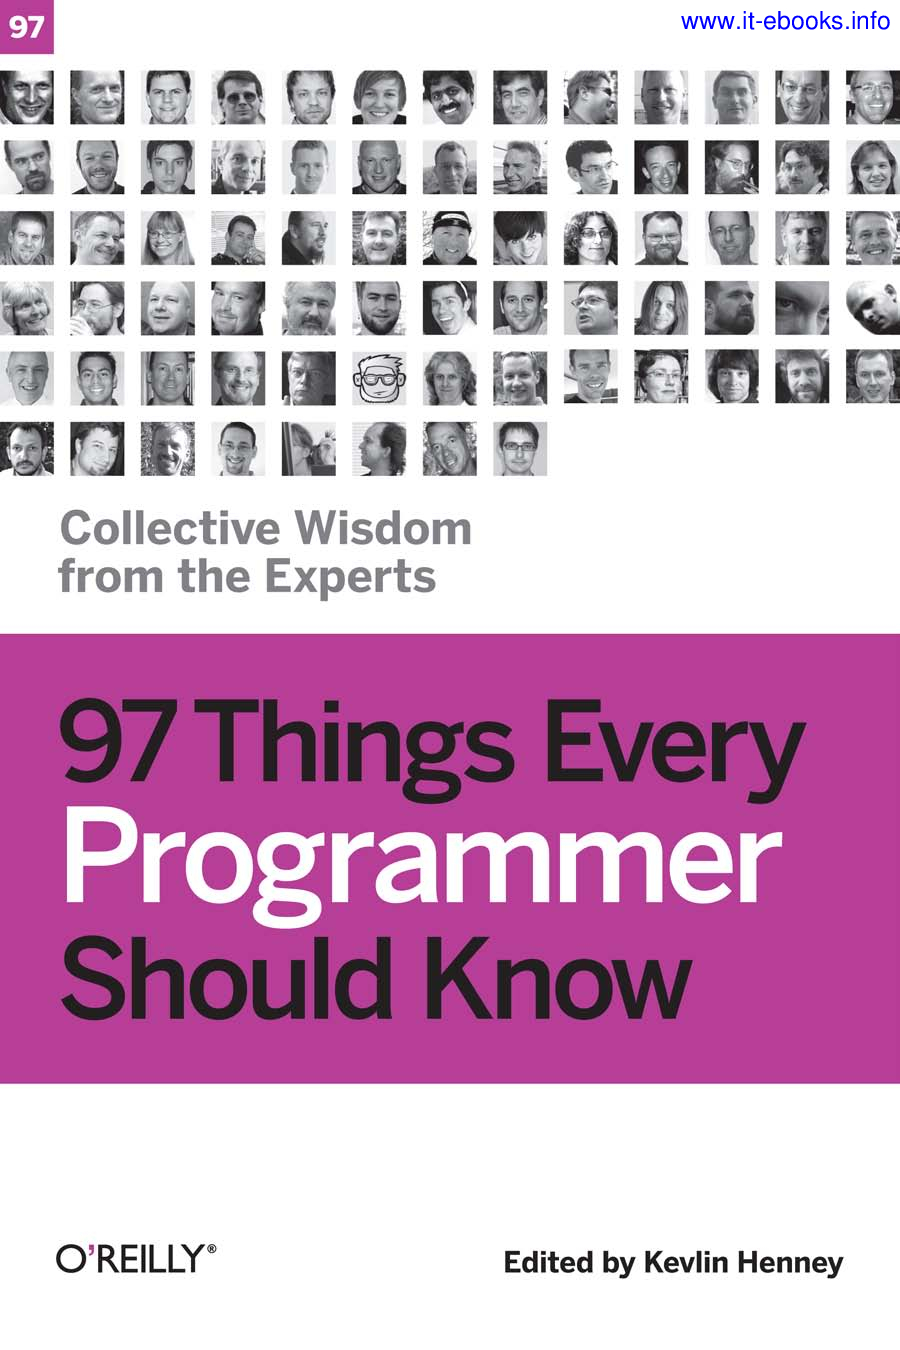 97 Things Every Programmer Should Know - Kevlin Henney